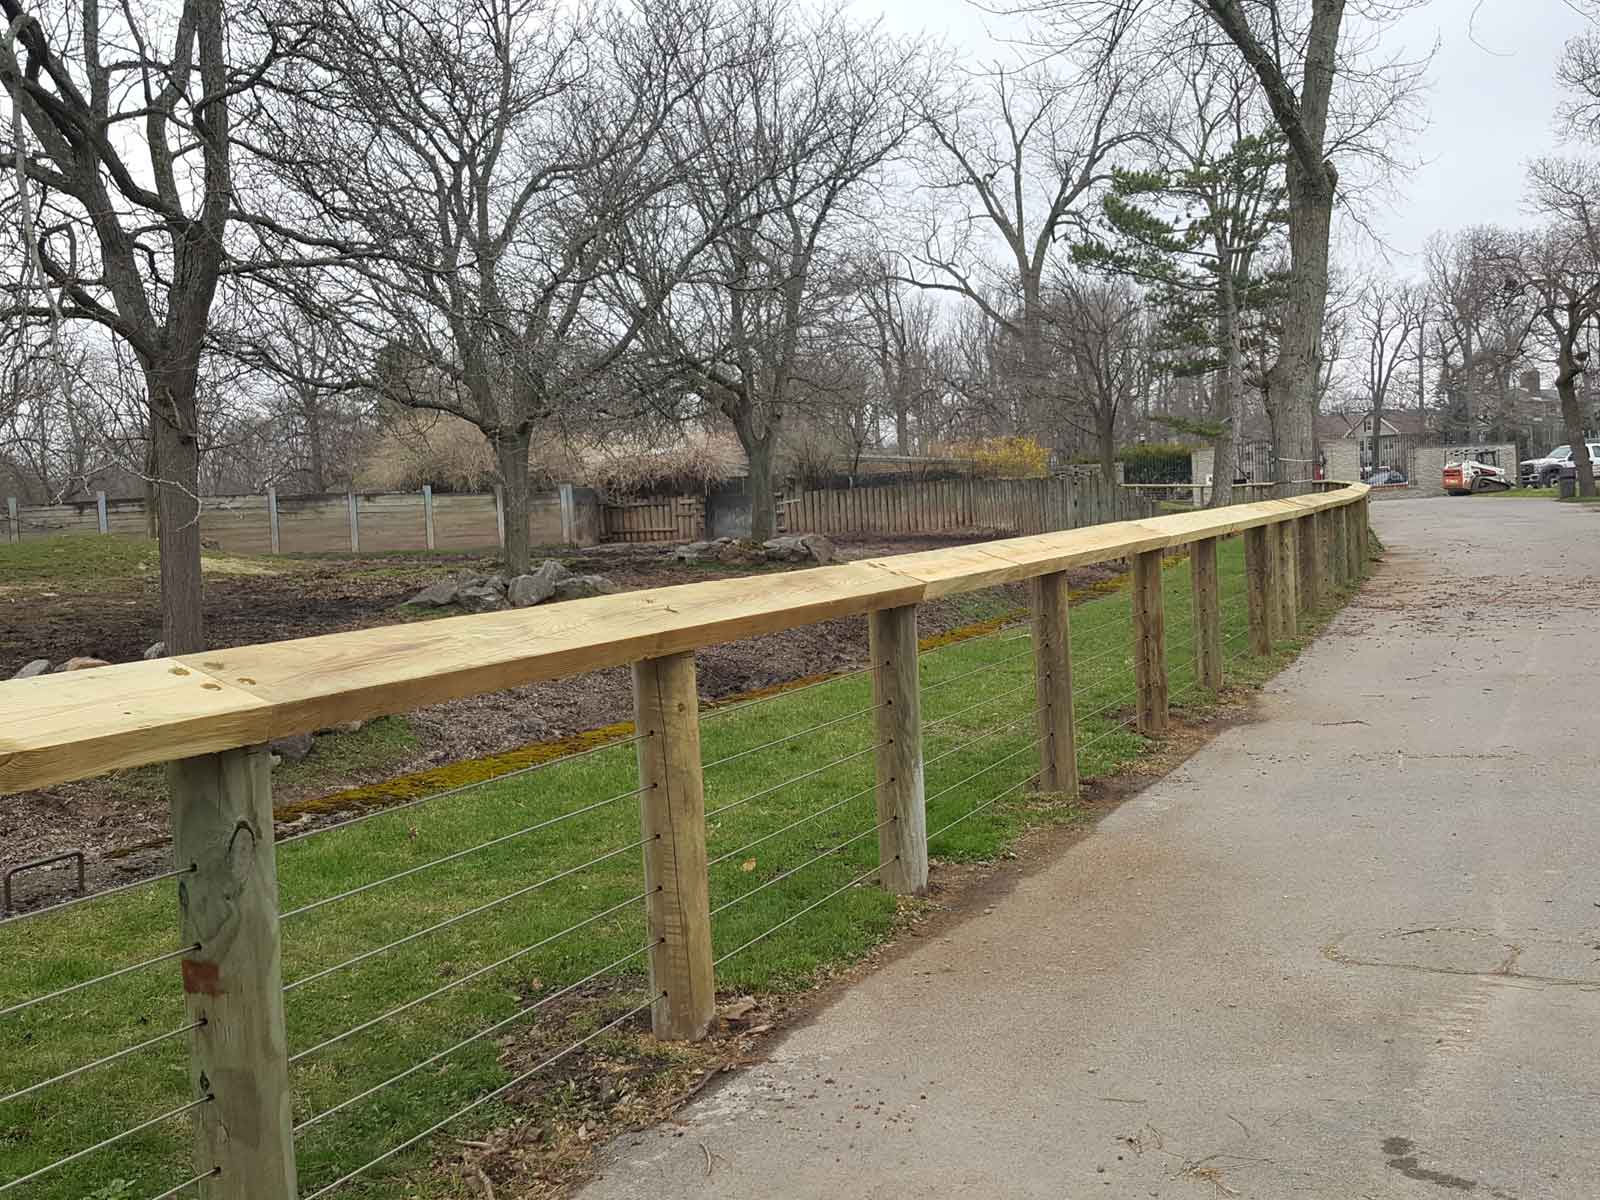 Commercial Fencing for Animal Parks and Zoos in Pittsburgh, PA